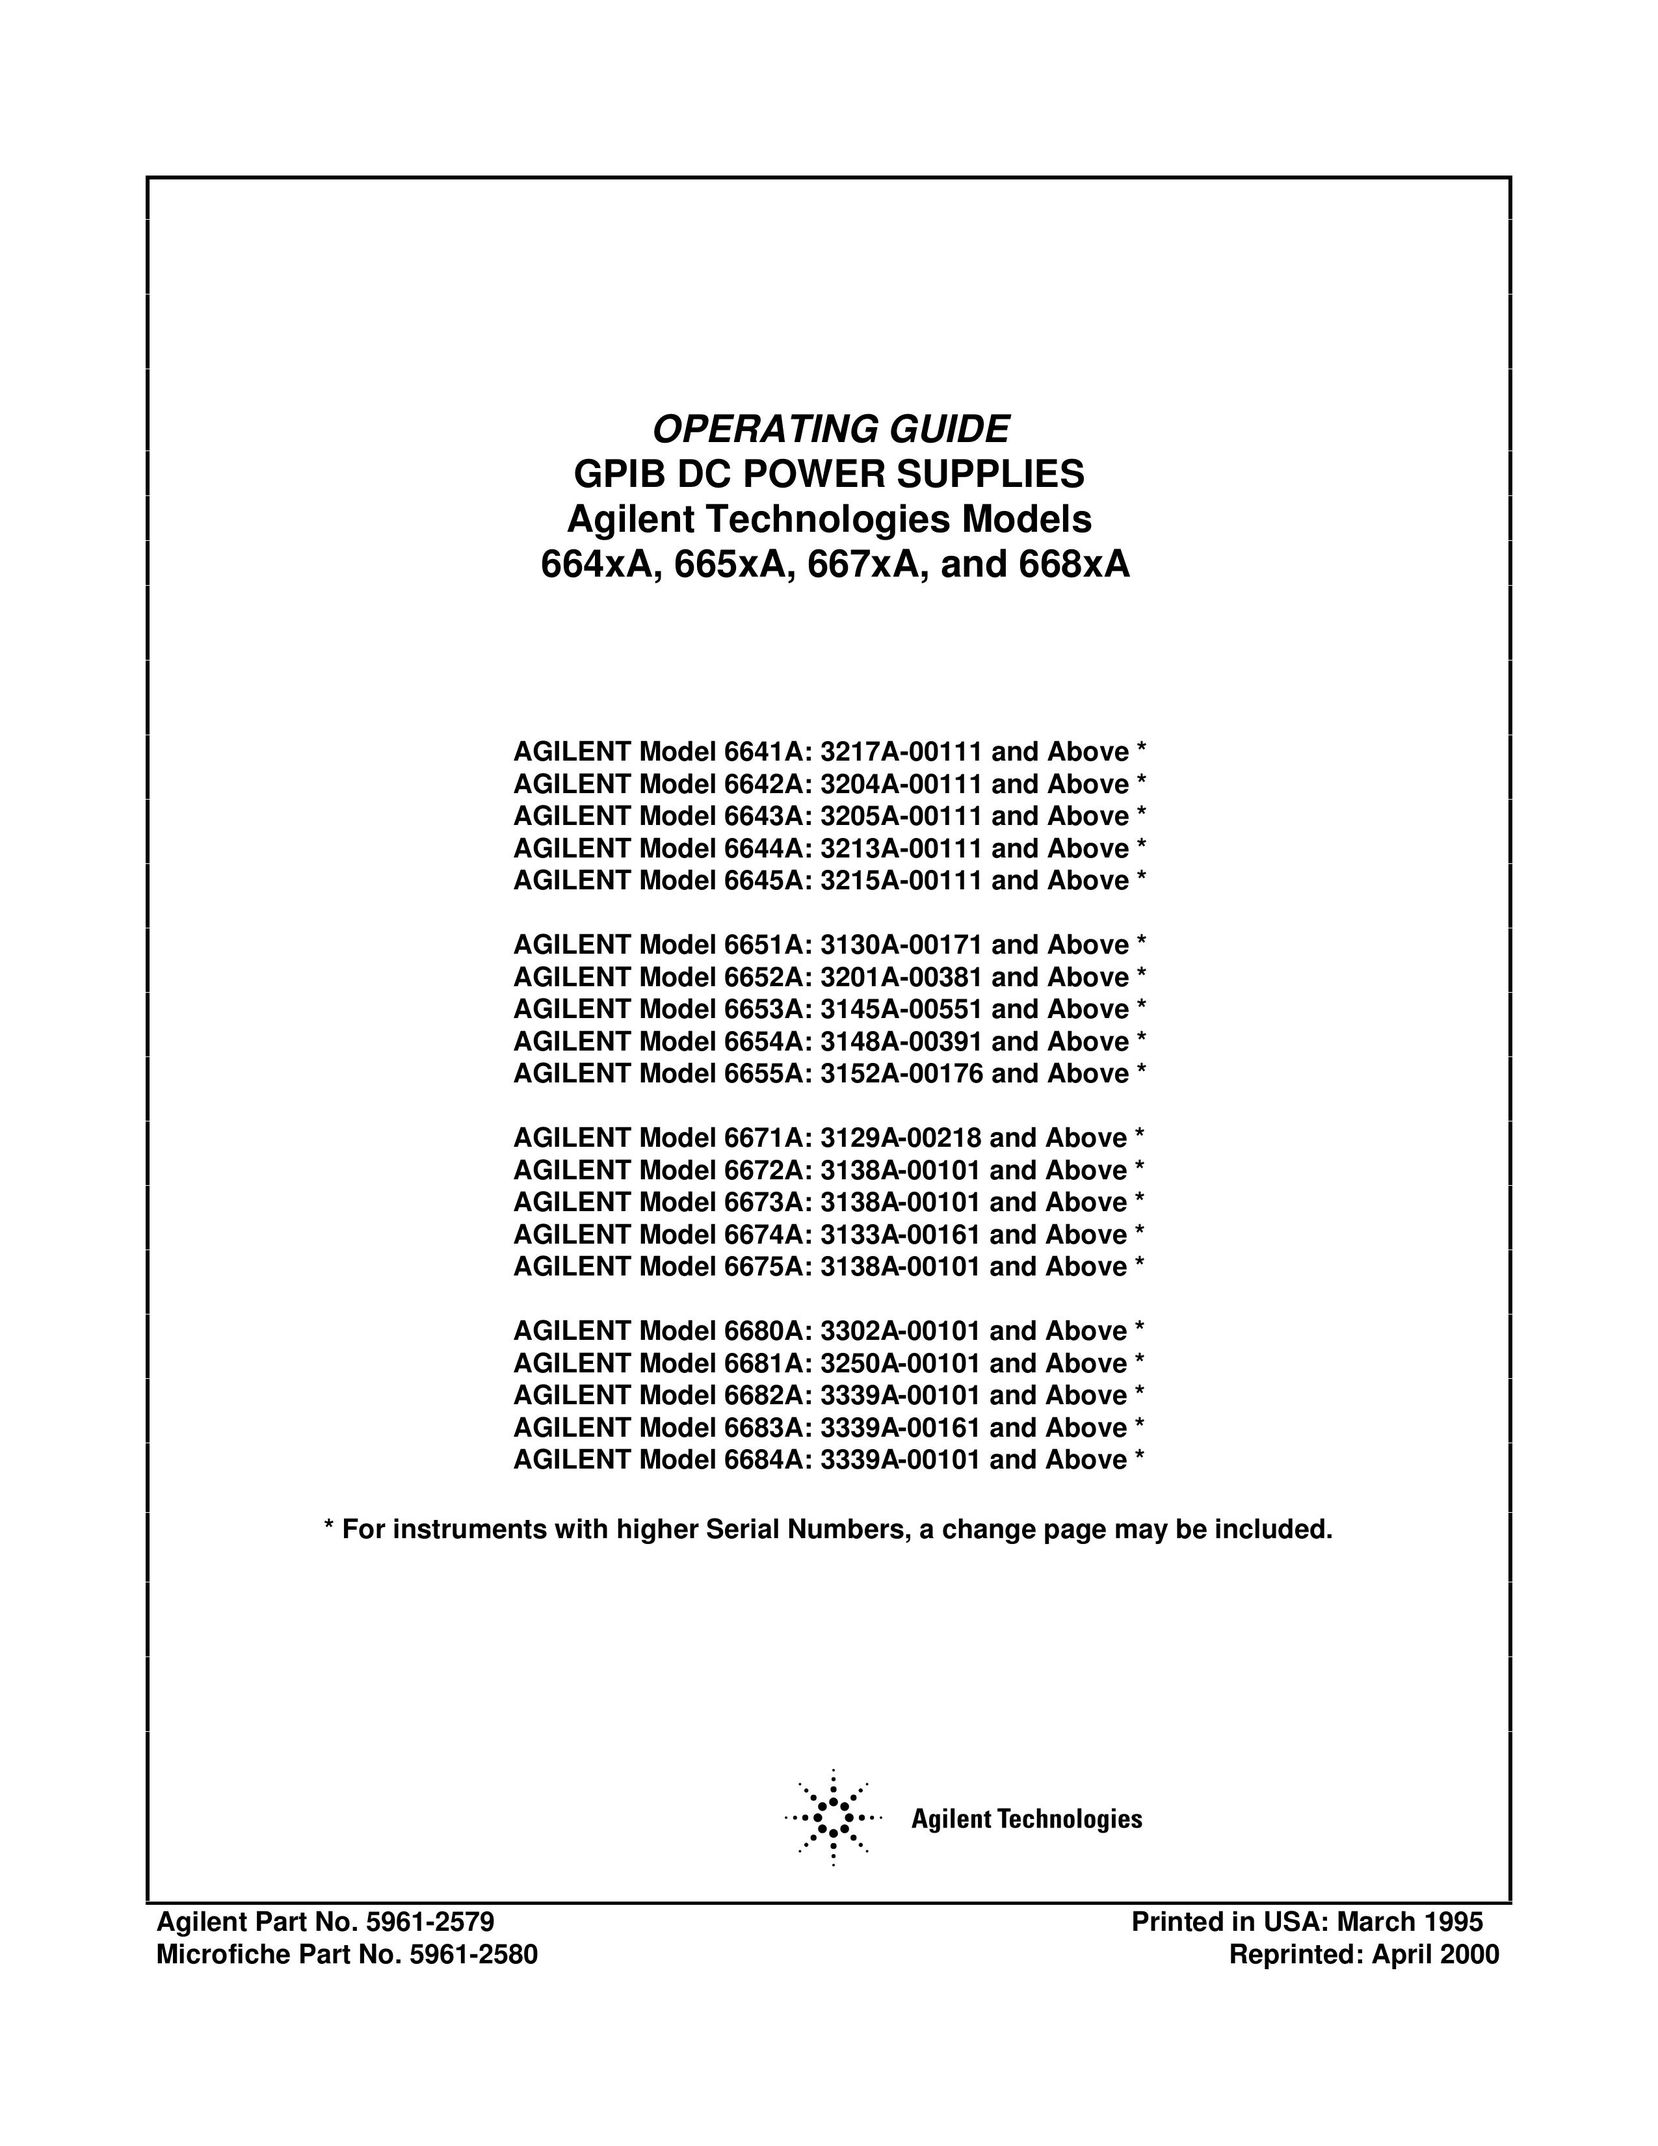 Agilent Technologies Model 6651A: 3130A-00171 Video Gaming Accessories User Manual (Page 1)